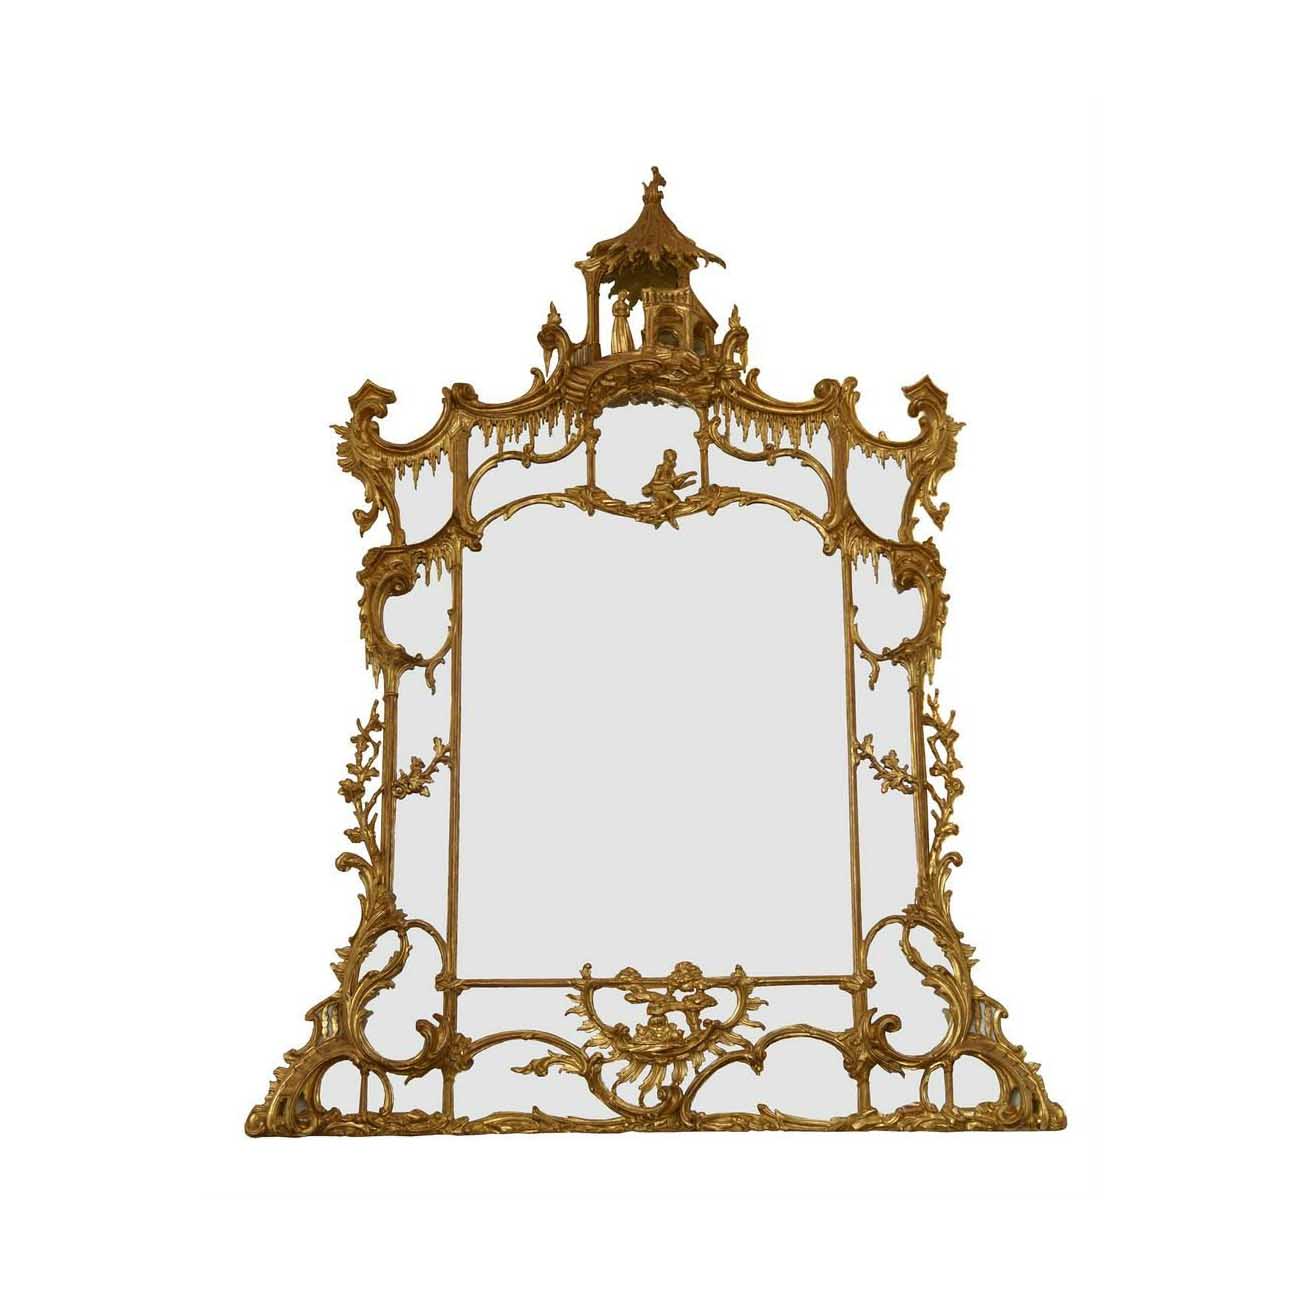 Large George III-style late 18th- or early 19th-century carved giltwood overmantle mirror, which sold for £10,000 (about $12,500) plus the buyer’s premium in September 2022. Image courtesy of Dreweatts Donnington Priory and LiveAuctioneers.